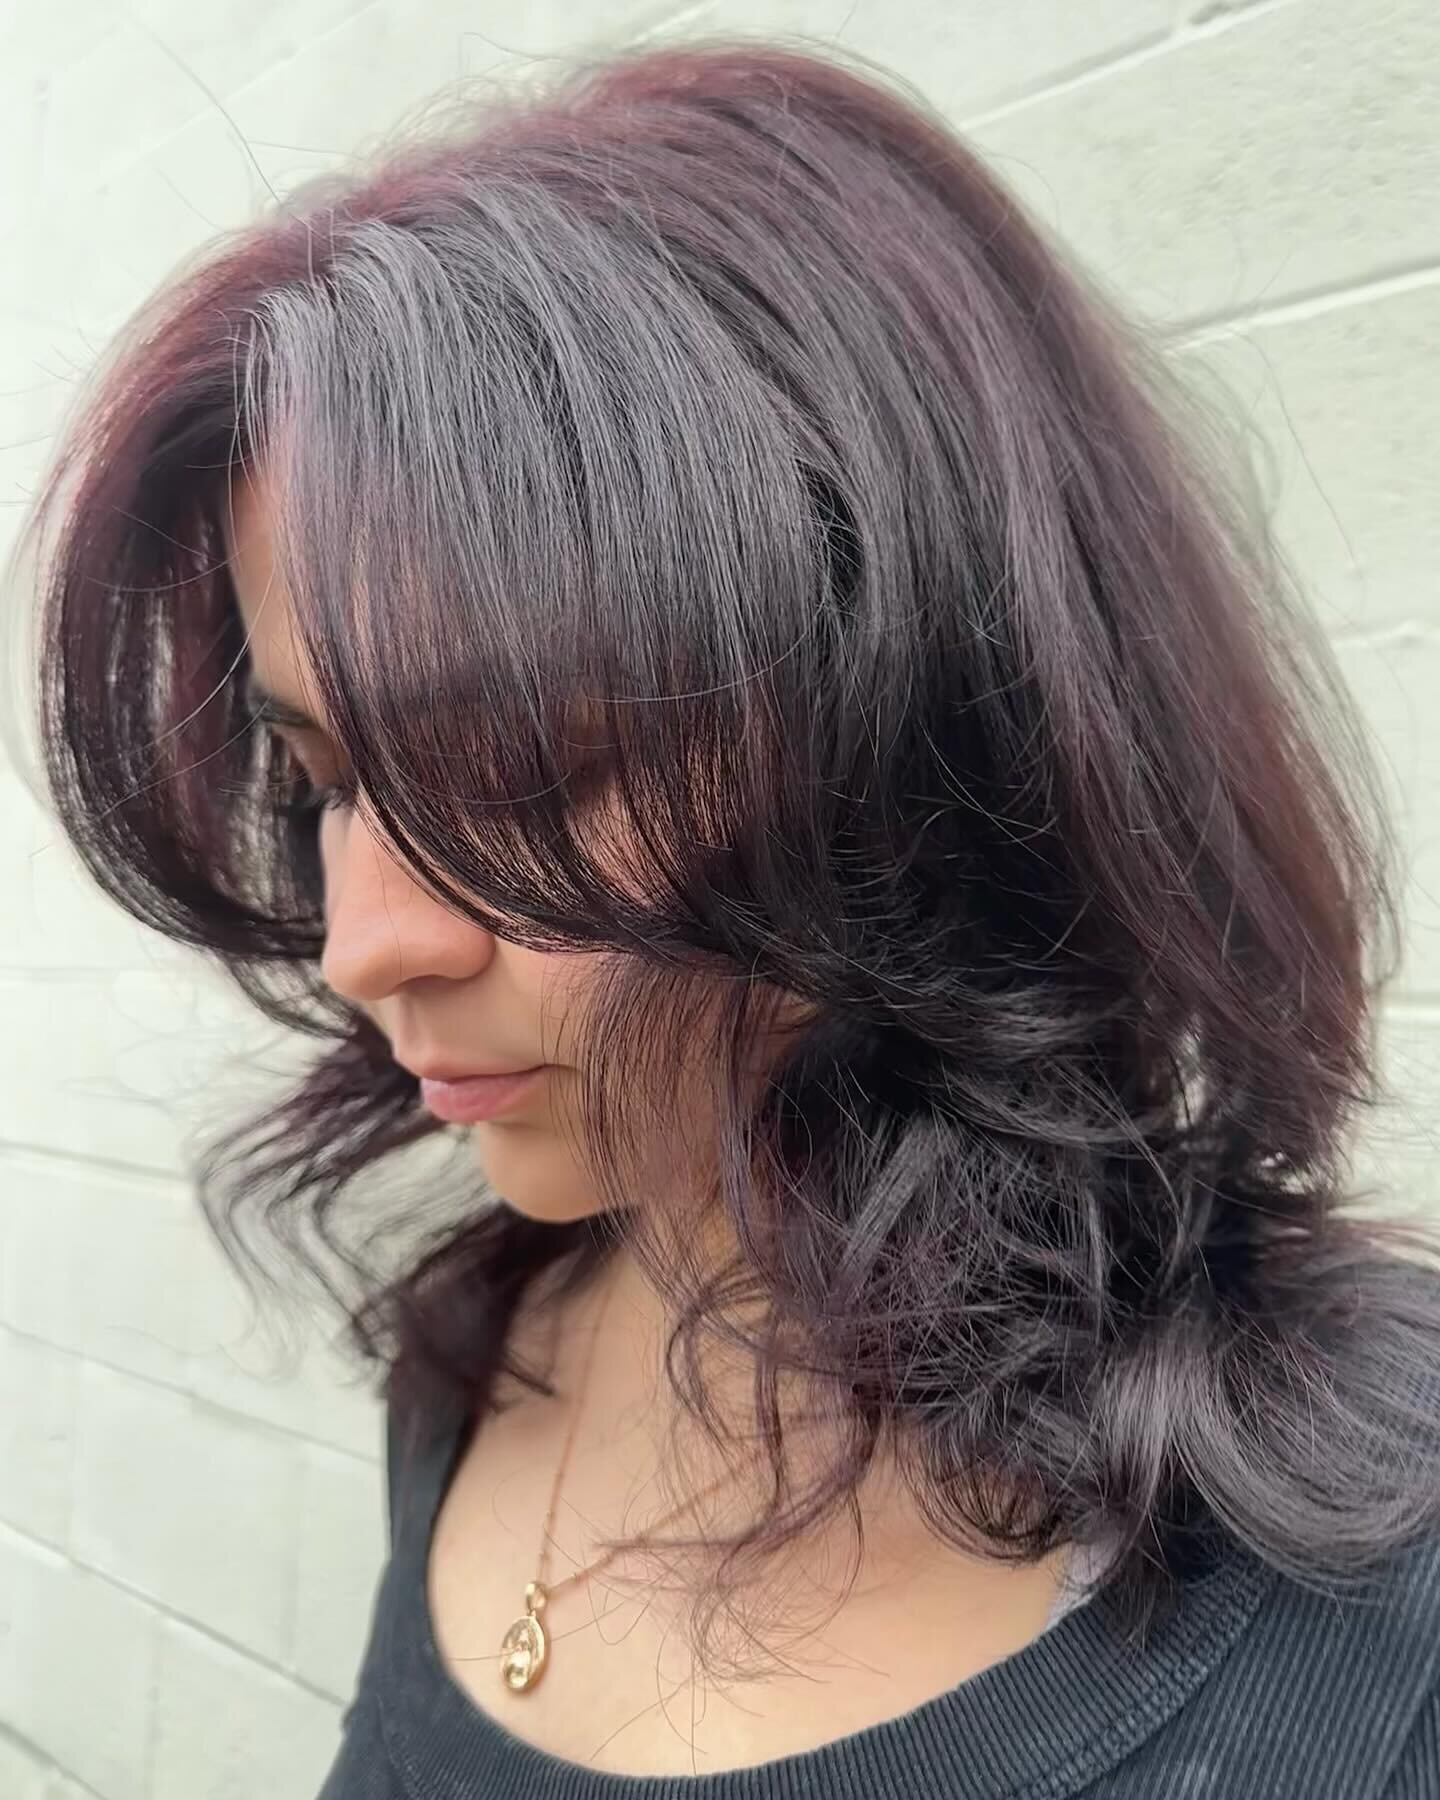 Fall in love with your hair❤️&zwj;🔥
-
@wemakeitvivid 
-
#newhair #hairtransformation #linthicum #vividsalon #redhair #layercut